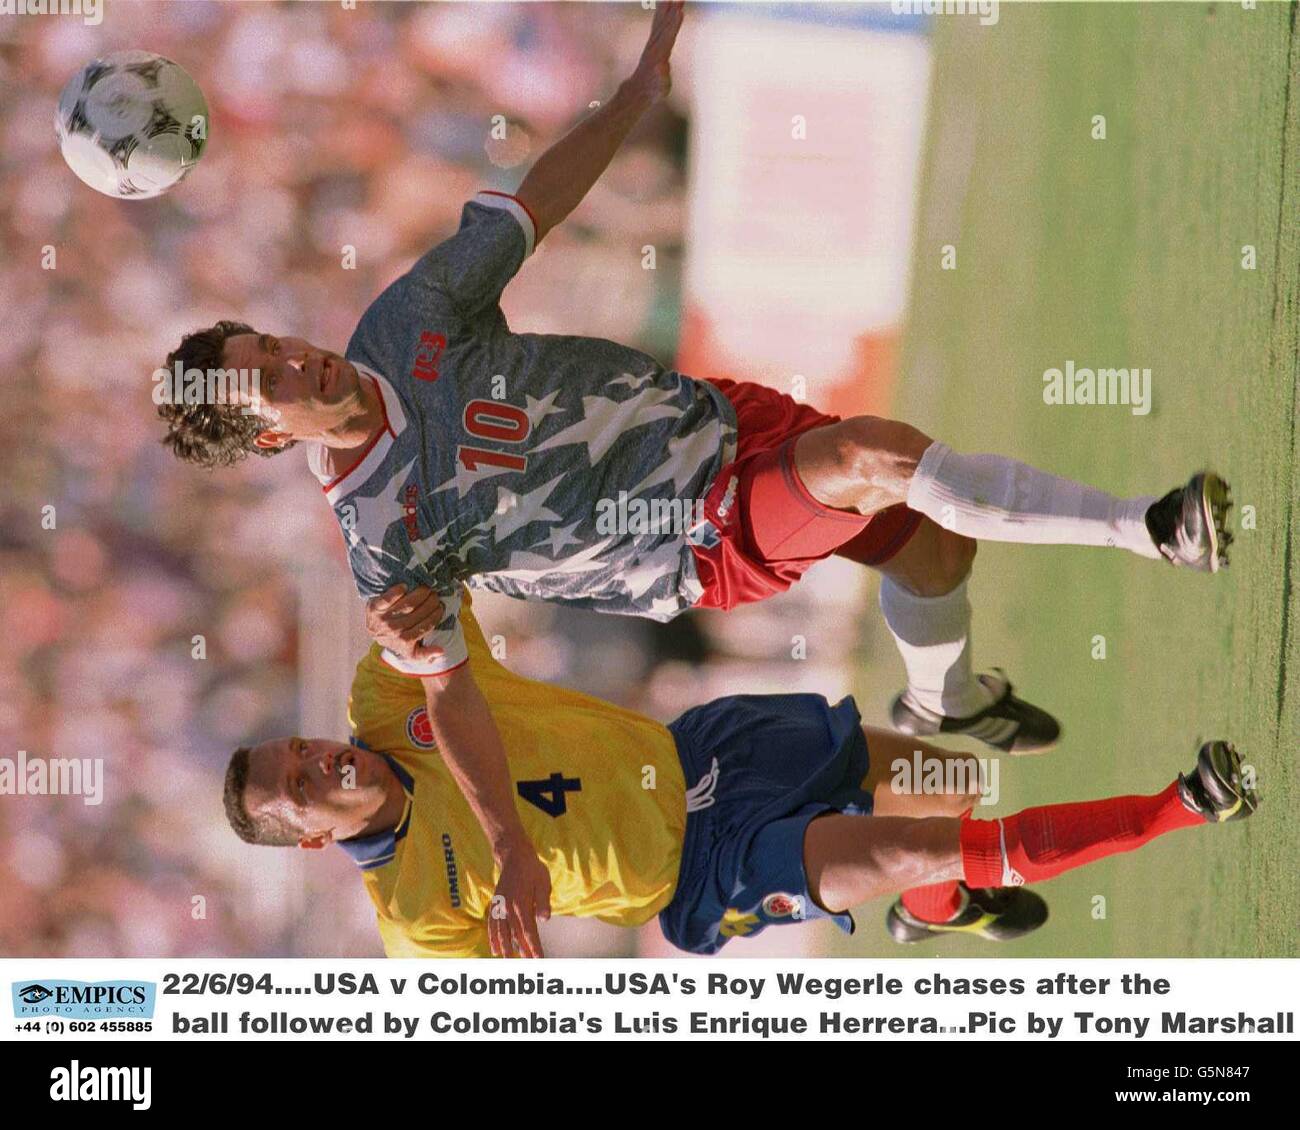 USA's Roy Wegerle chases after the ball followed by Colombia's Luis Enrique Herrera Stock Photo